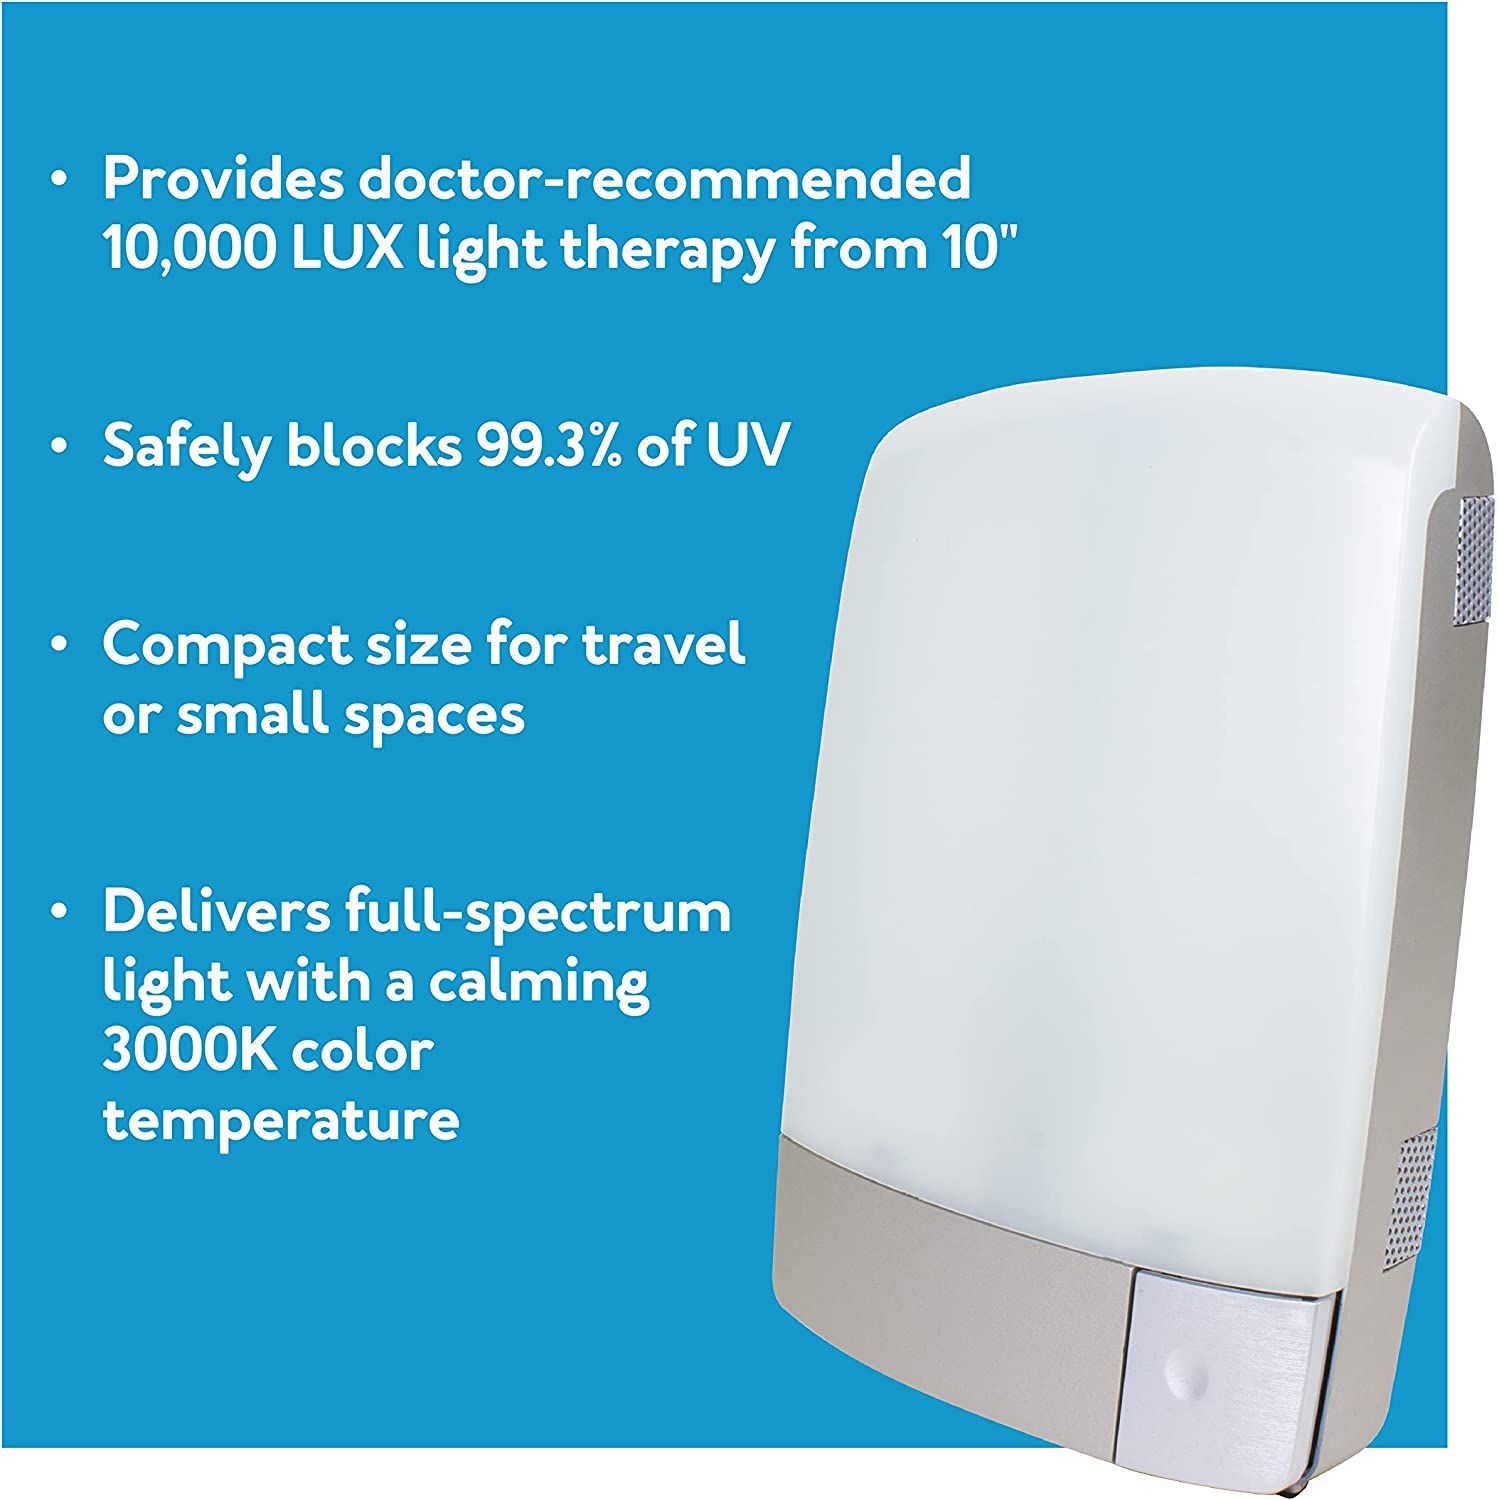 Carex Sunlite Light Therapy Lamp features